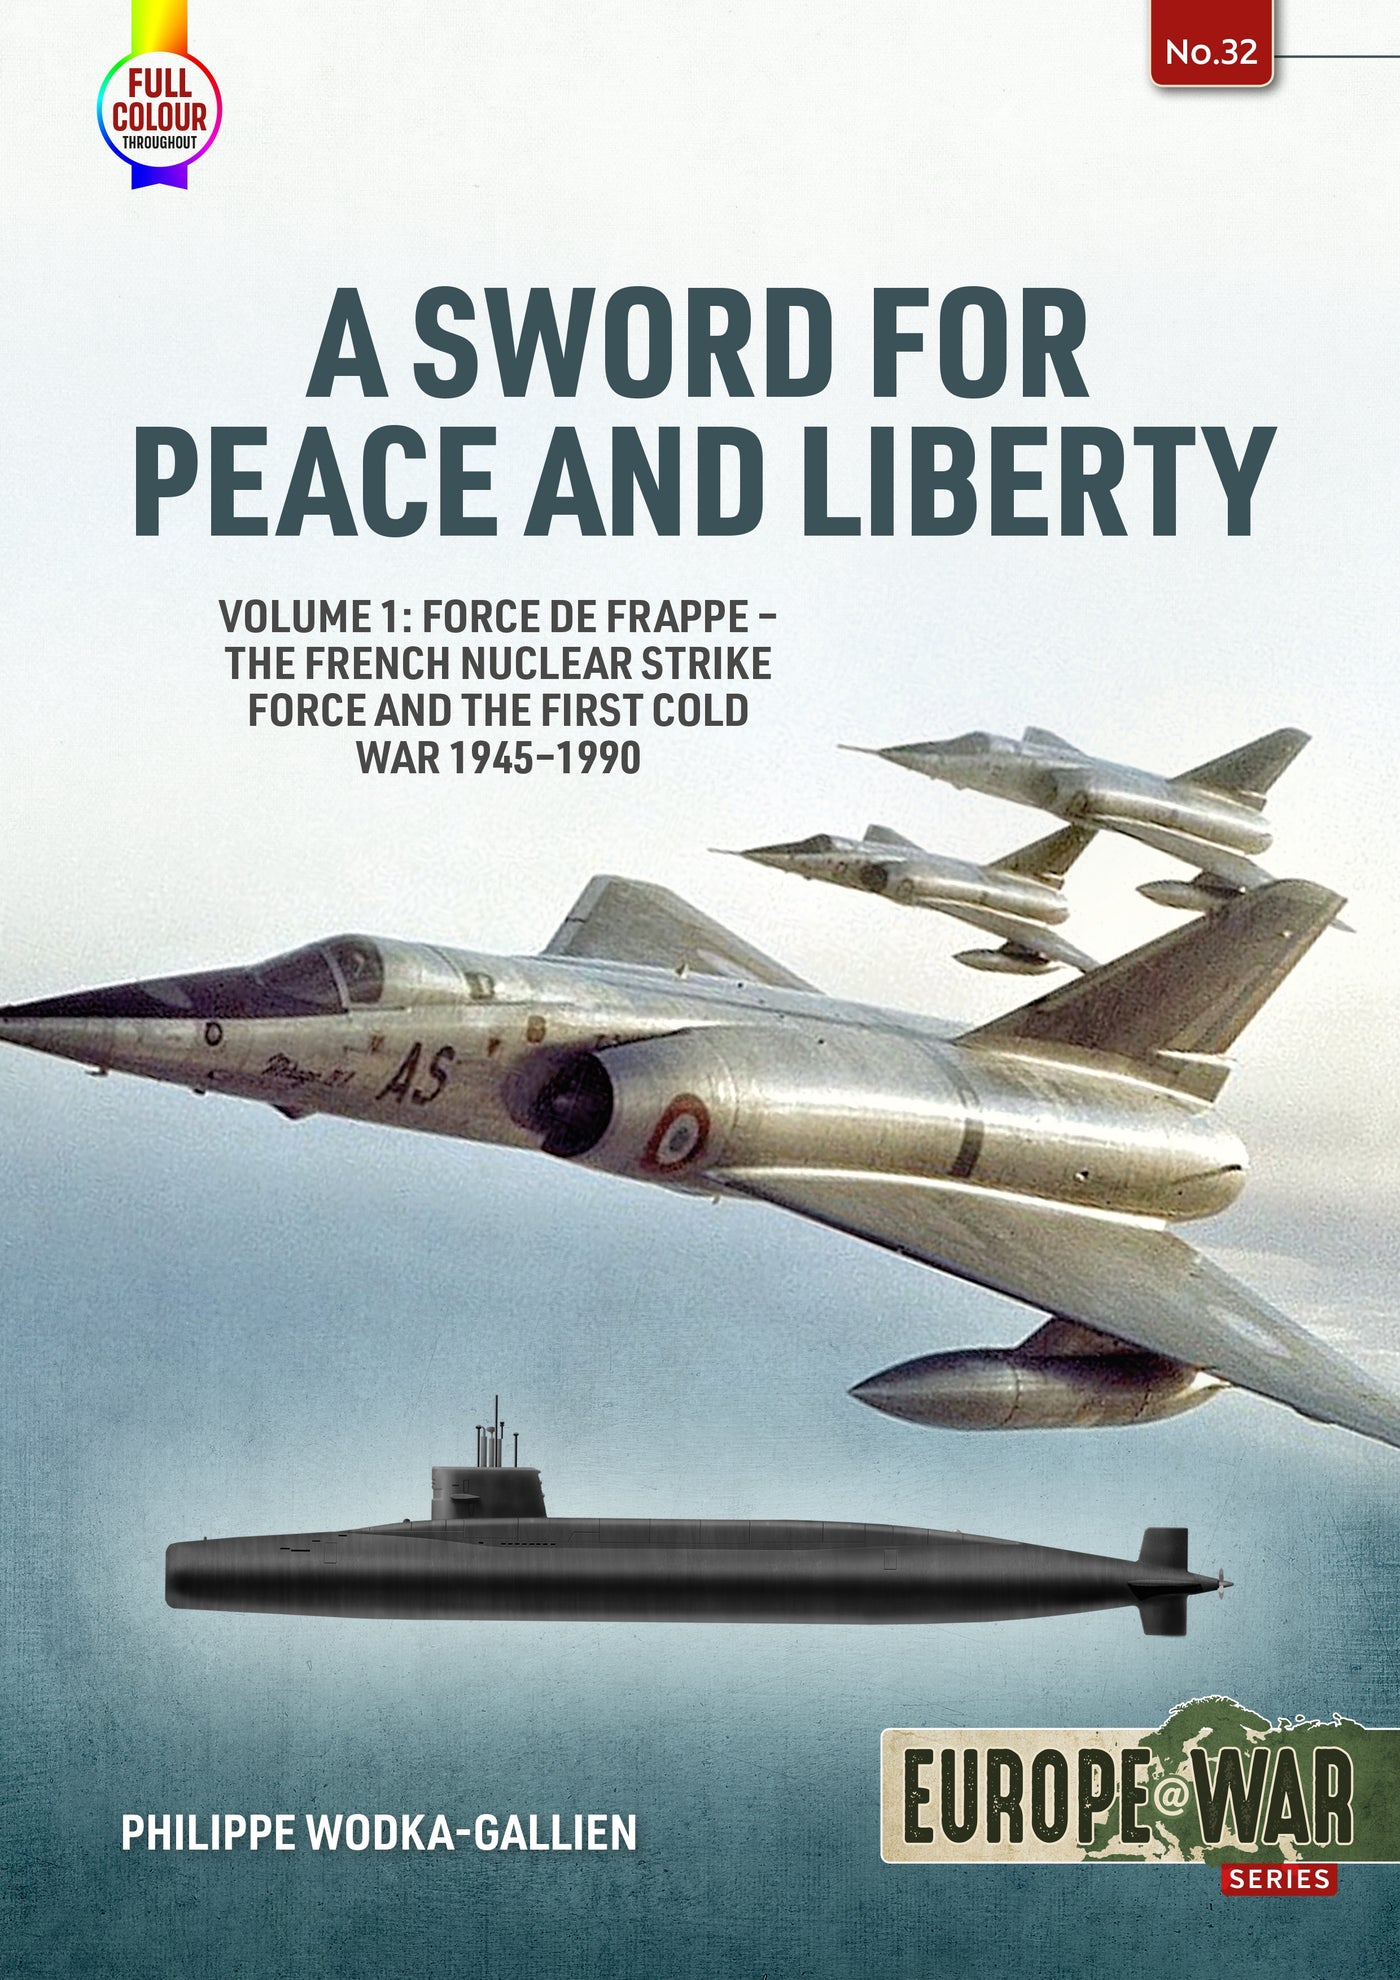 A Sword for Peace and Liberty